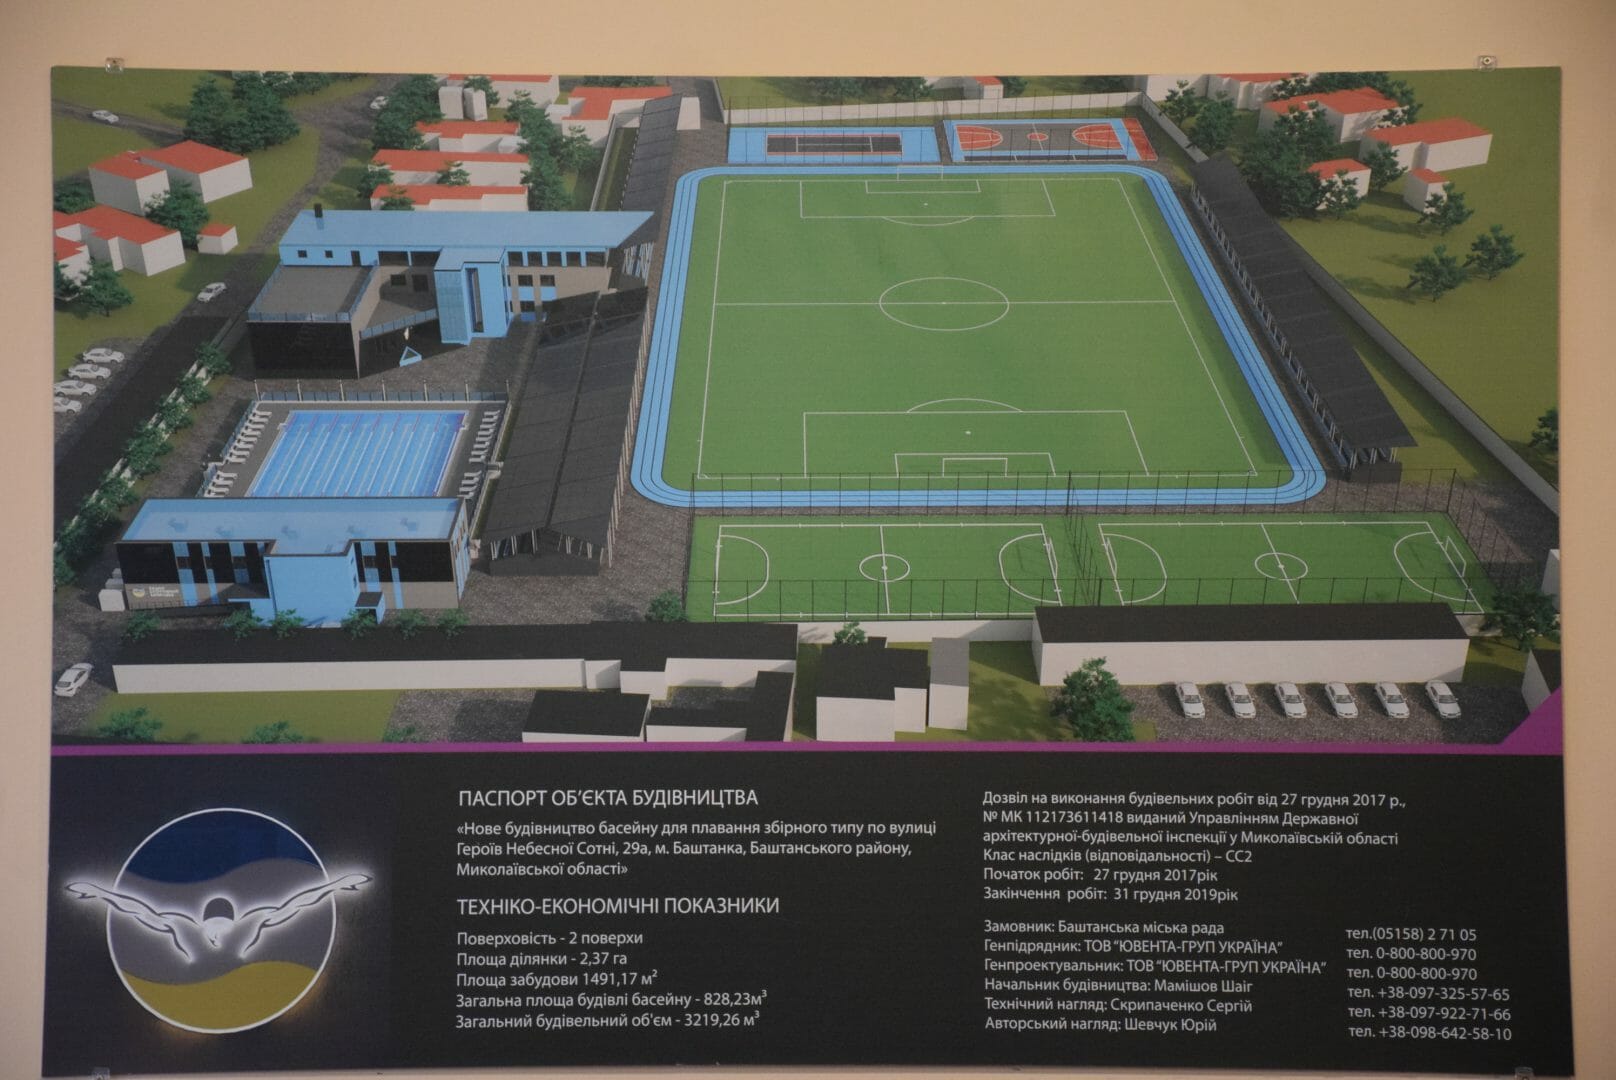 Plan of reconstruction of the local sports centre with a swimming pool. Photo provided by community. 